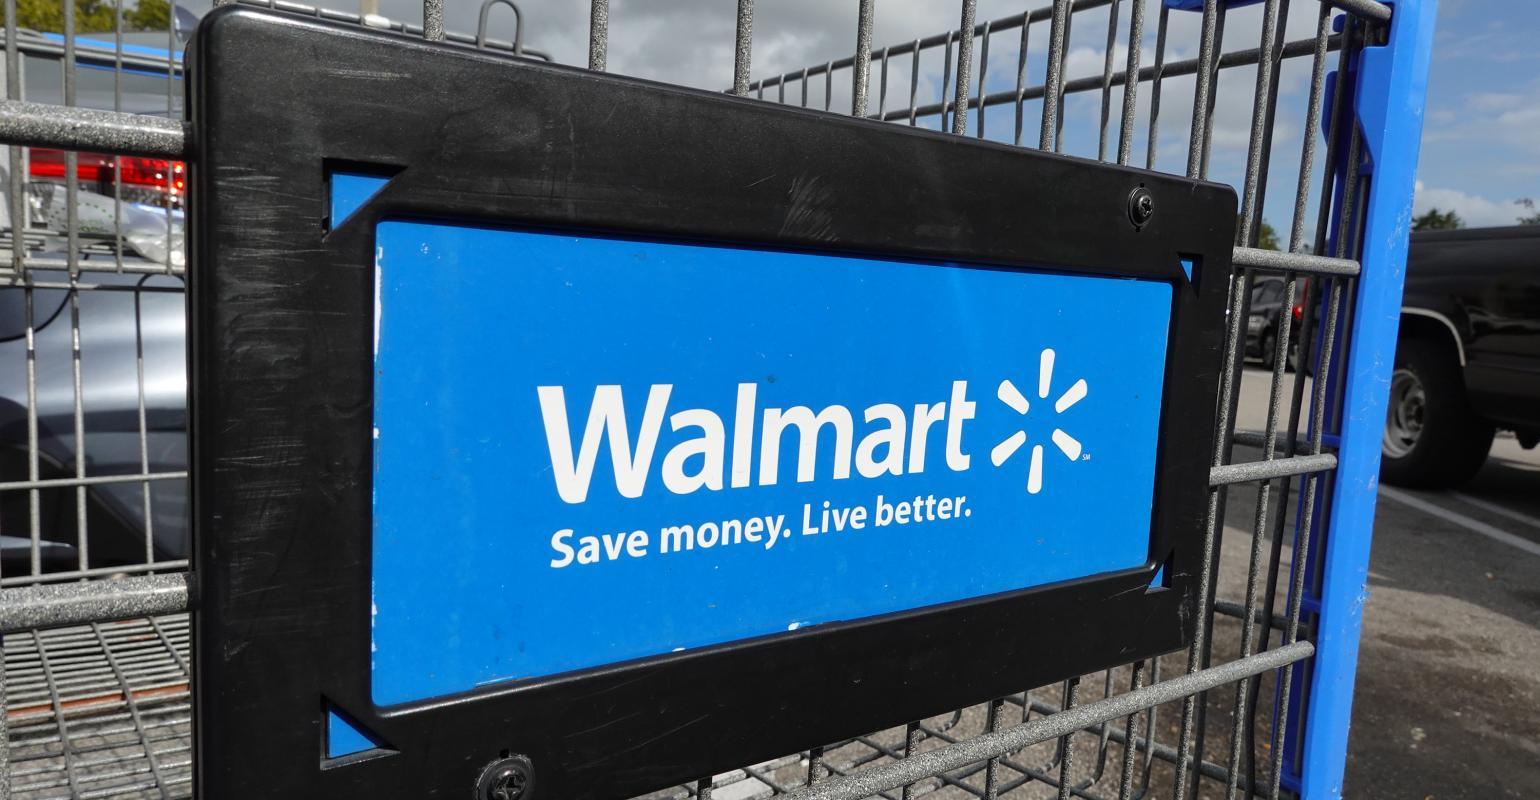 Walmart Canada Corporate News and Information